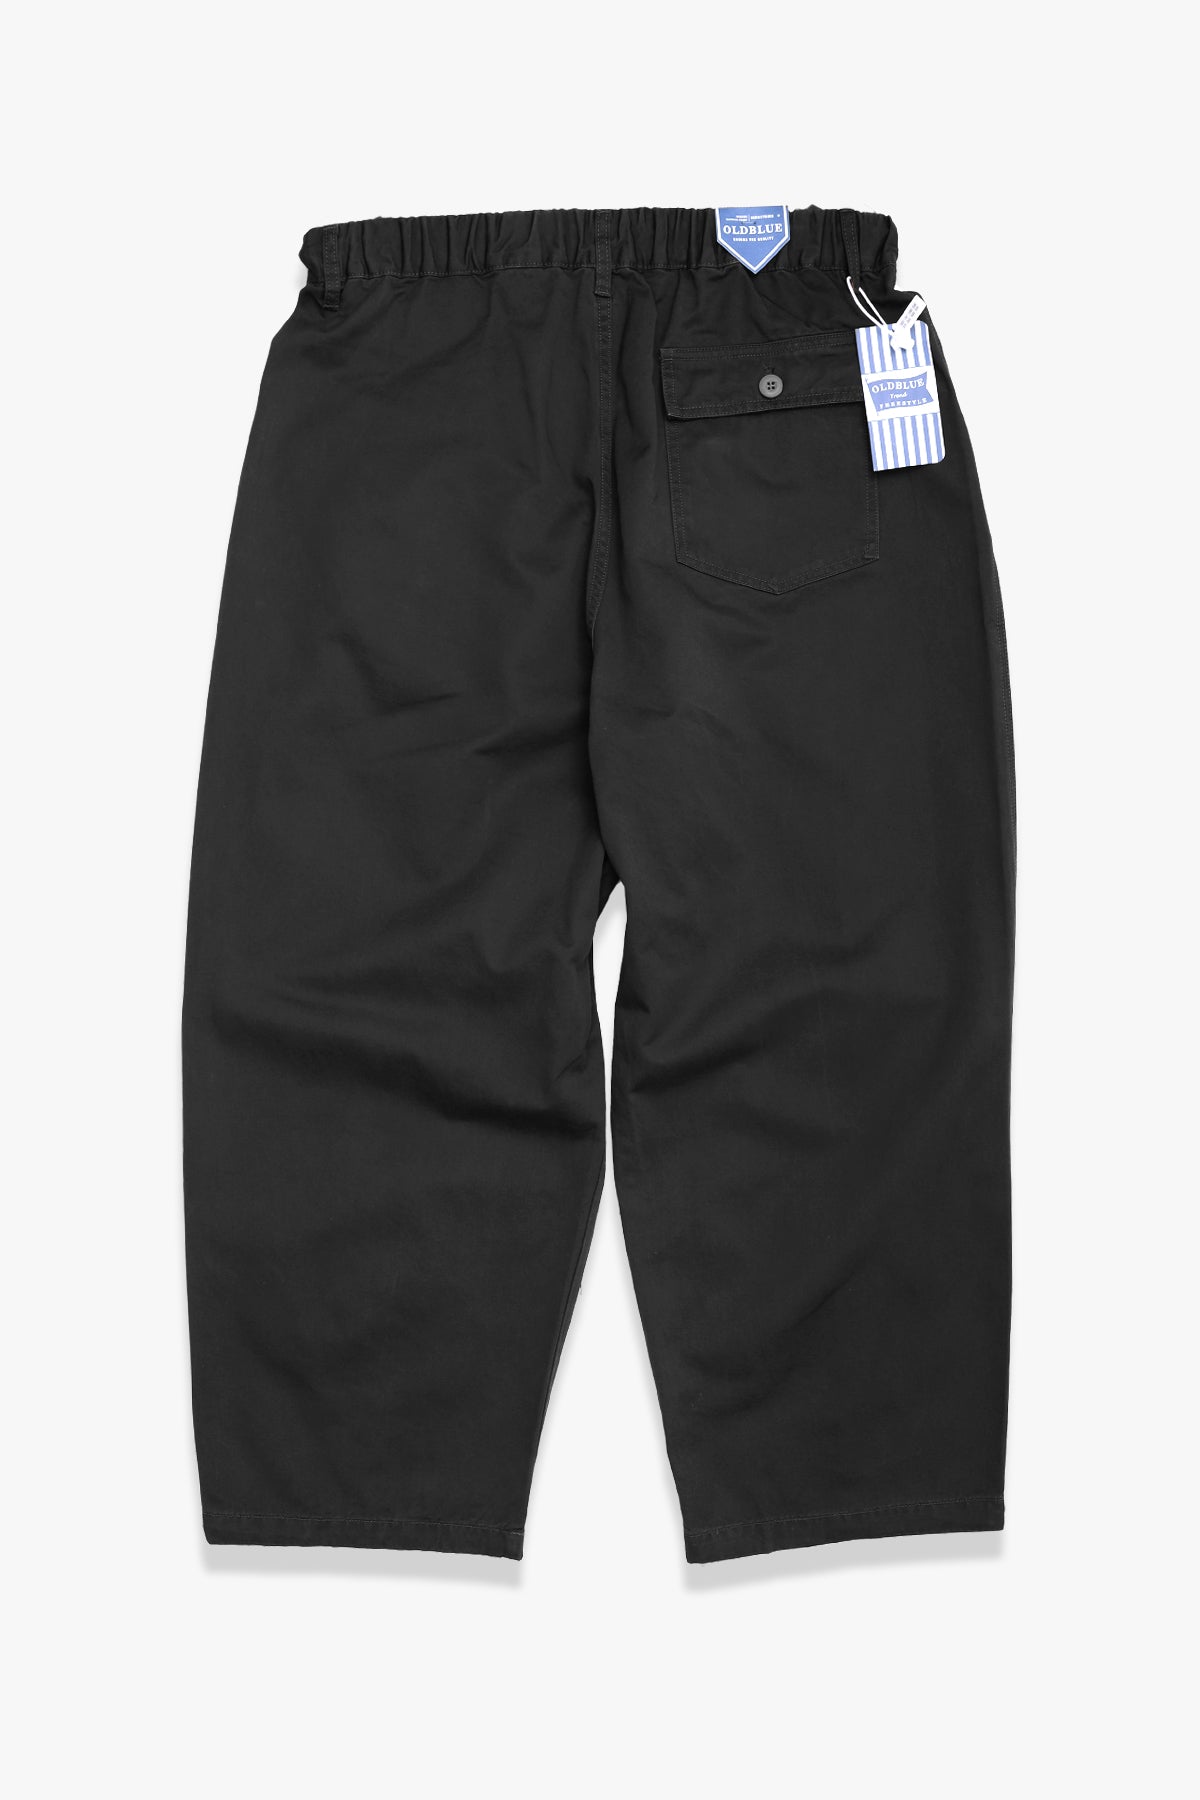 Overall Union - Military Over Pants - Black